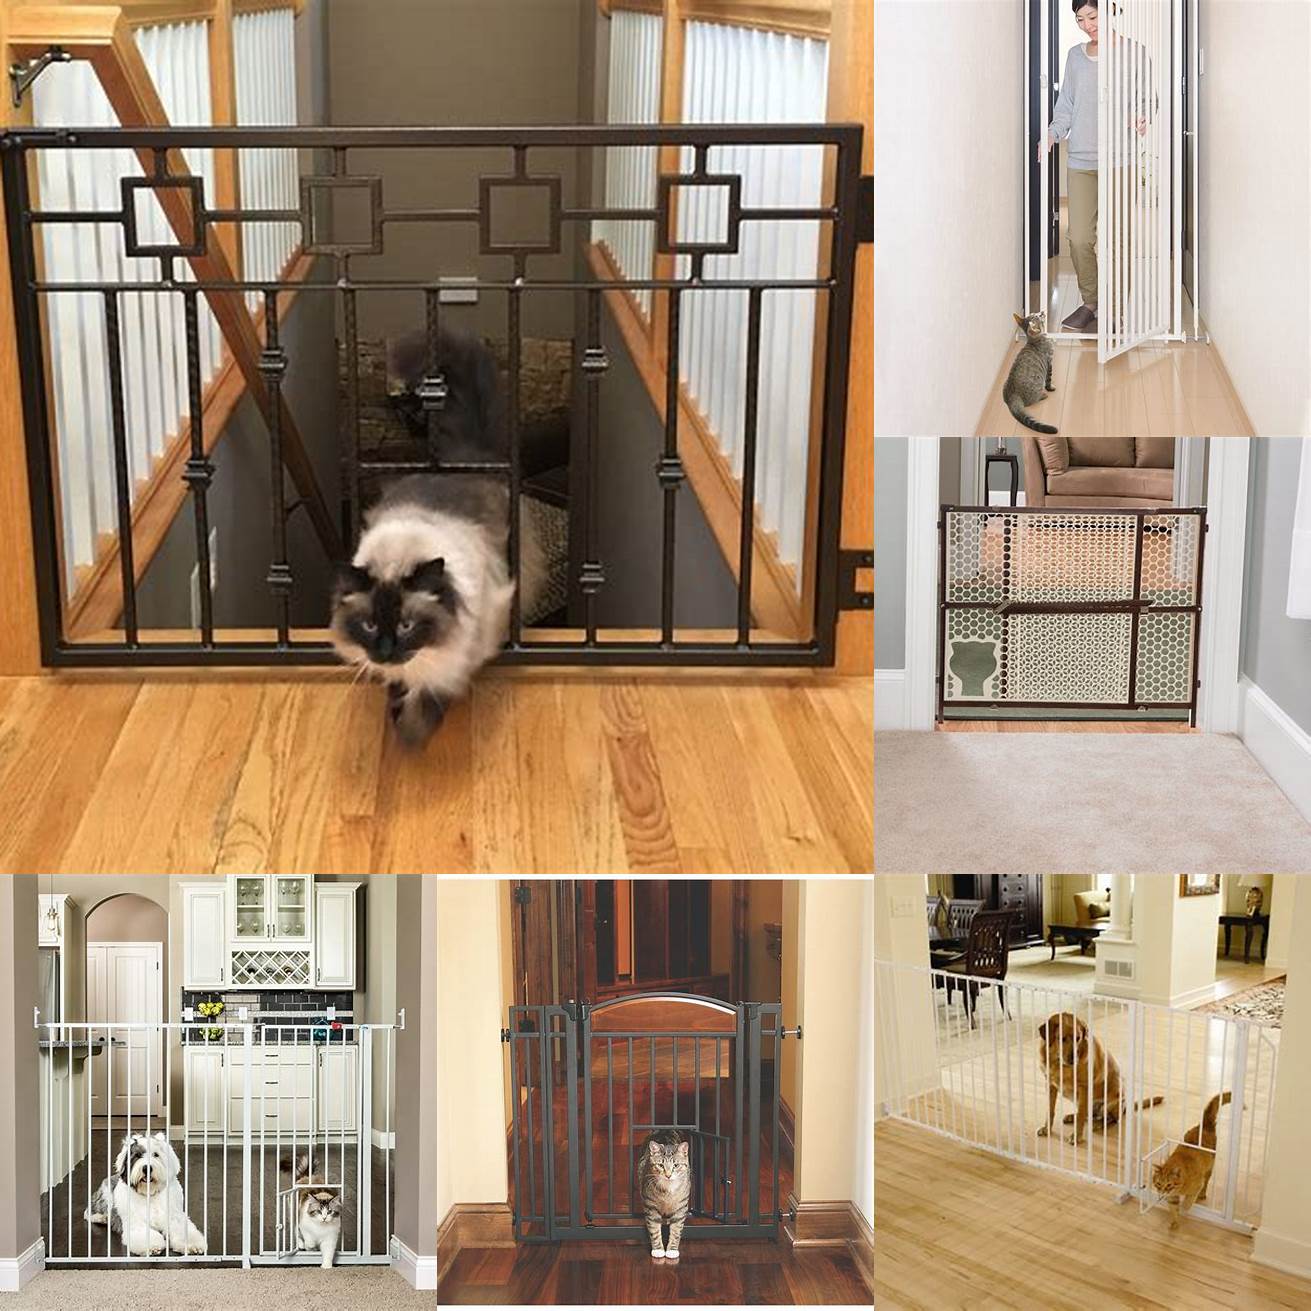 Adjustability Consider purchasing an adjustable cat gate that can be customized to fit your specific needs